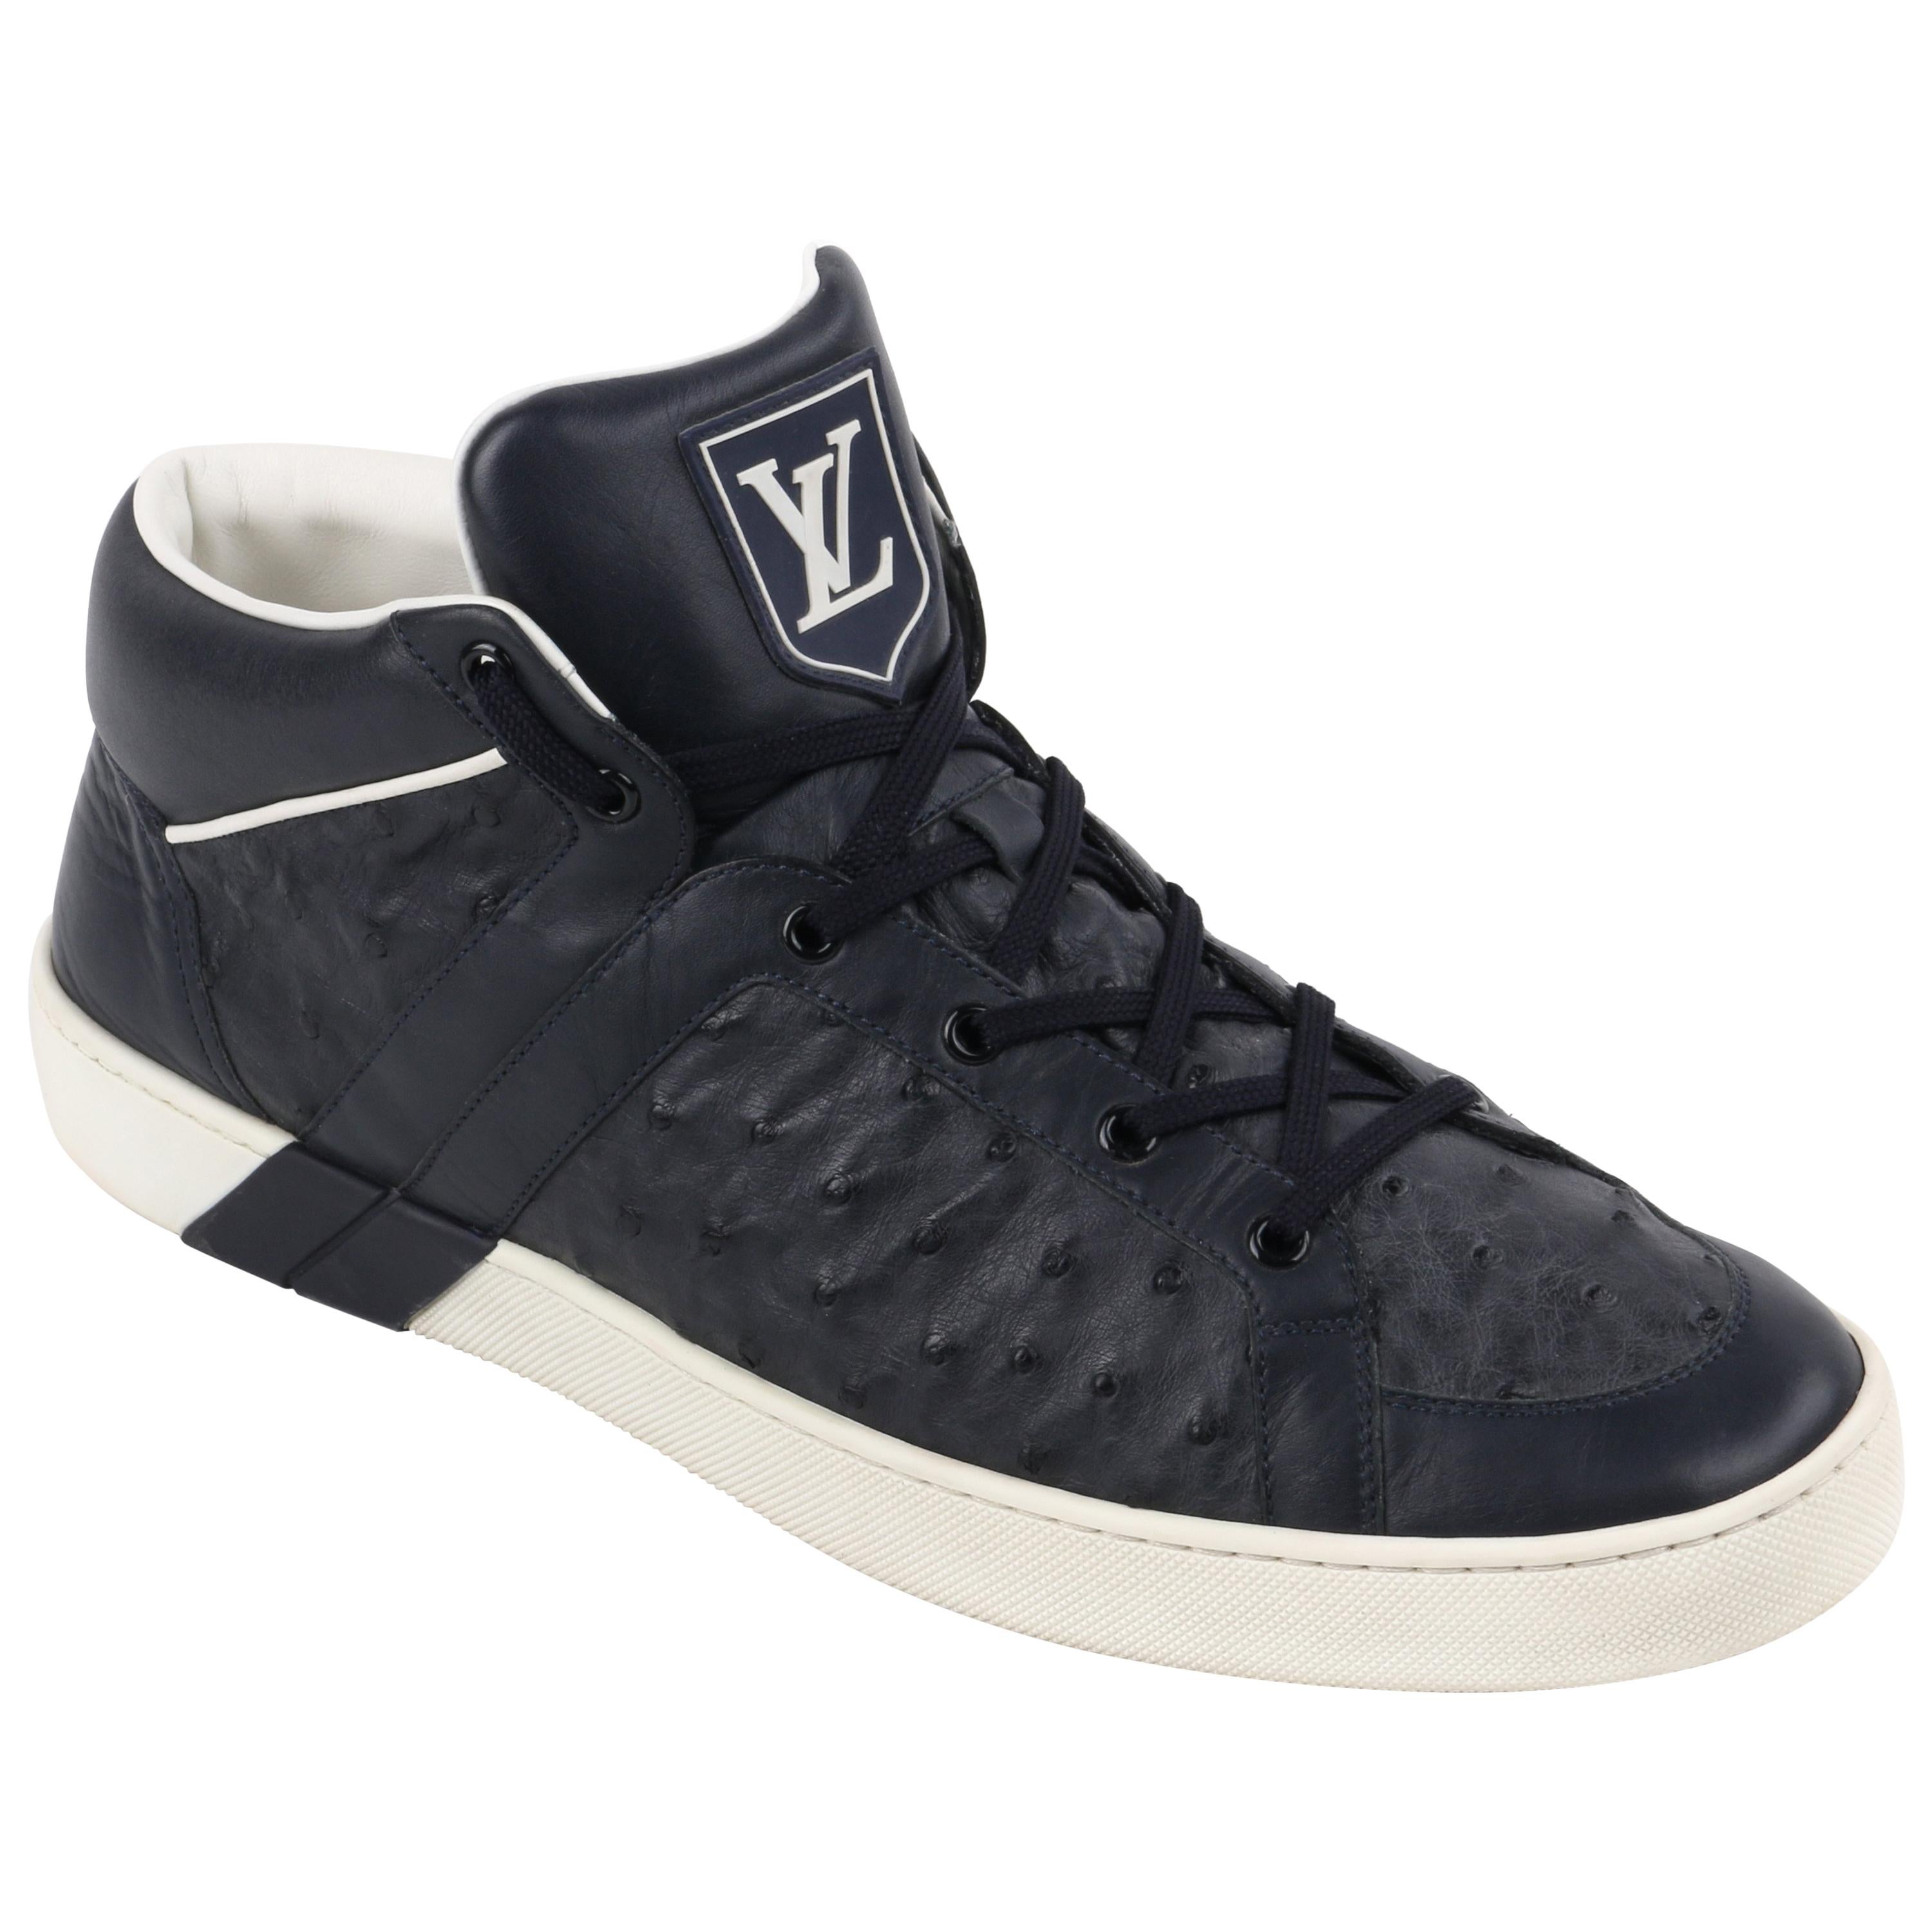 LOUIS VUITTON A/W 2010 "Meteor" Navy Blue Ostrich Leather High Top Sneakers